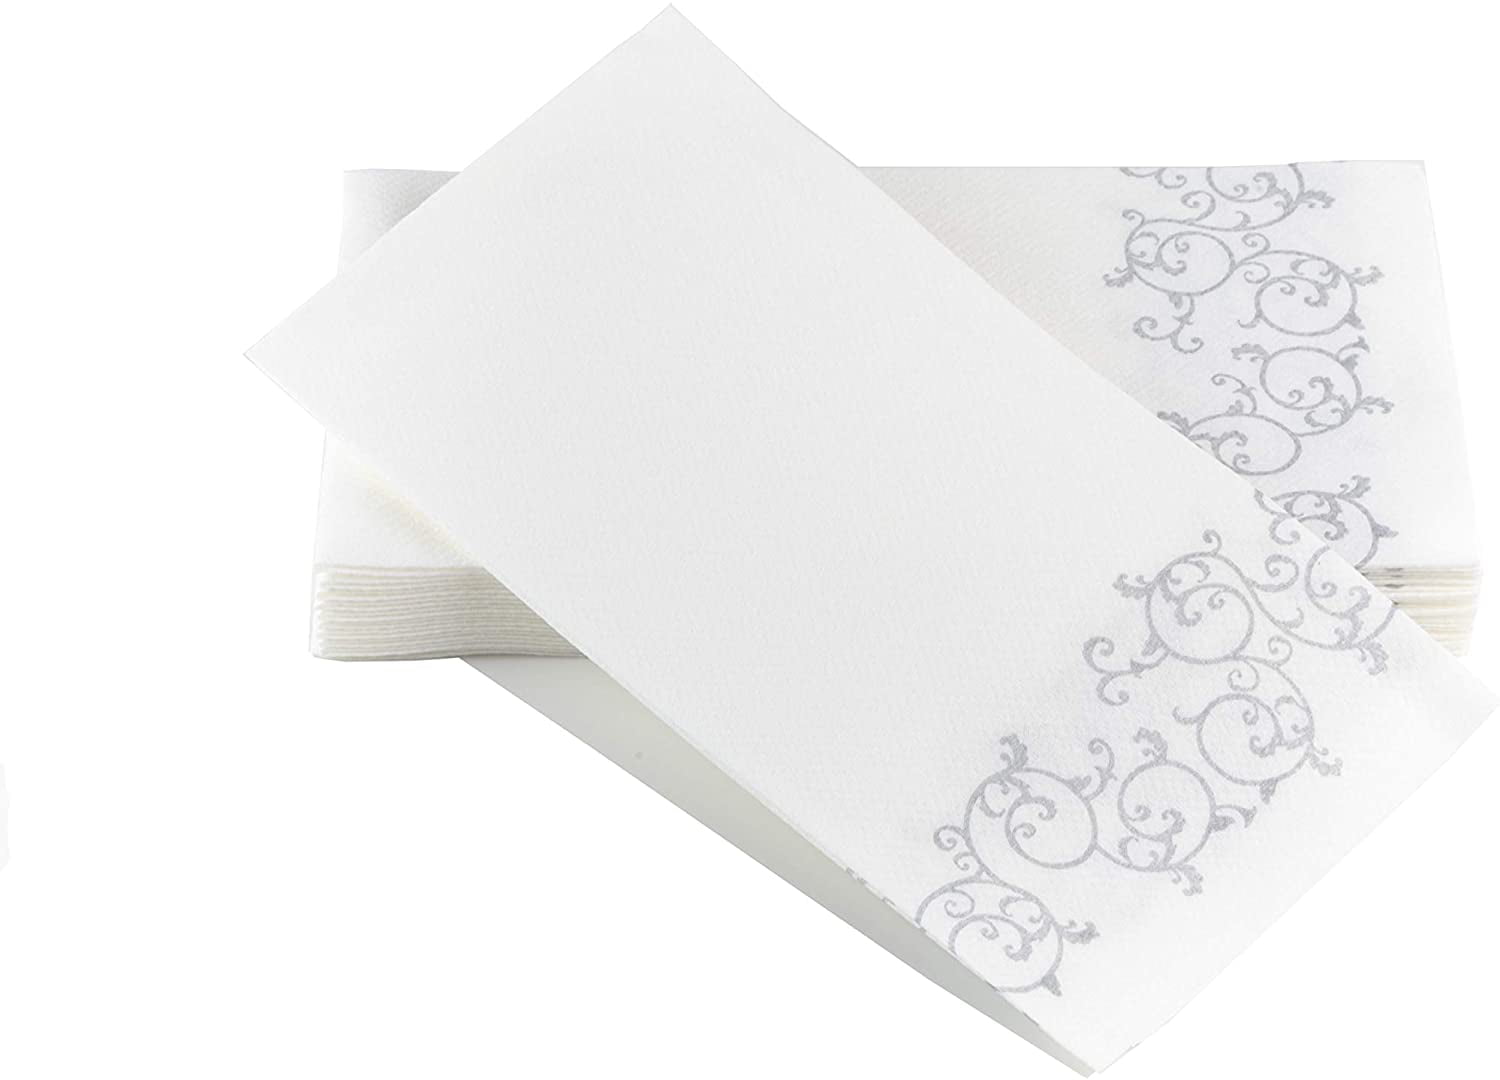 Box of 100 Simulinen Decorative Linen-Feel Bathroom Hand Towels GOLD Floral Disposable Paper Towels for Guests Perfect Size 12x17 inches unfolded & 8.5x4 inches folded 